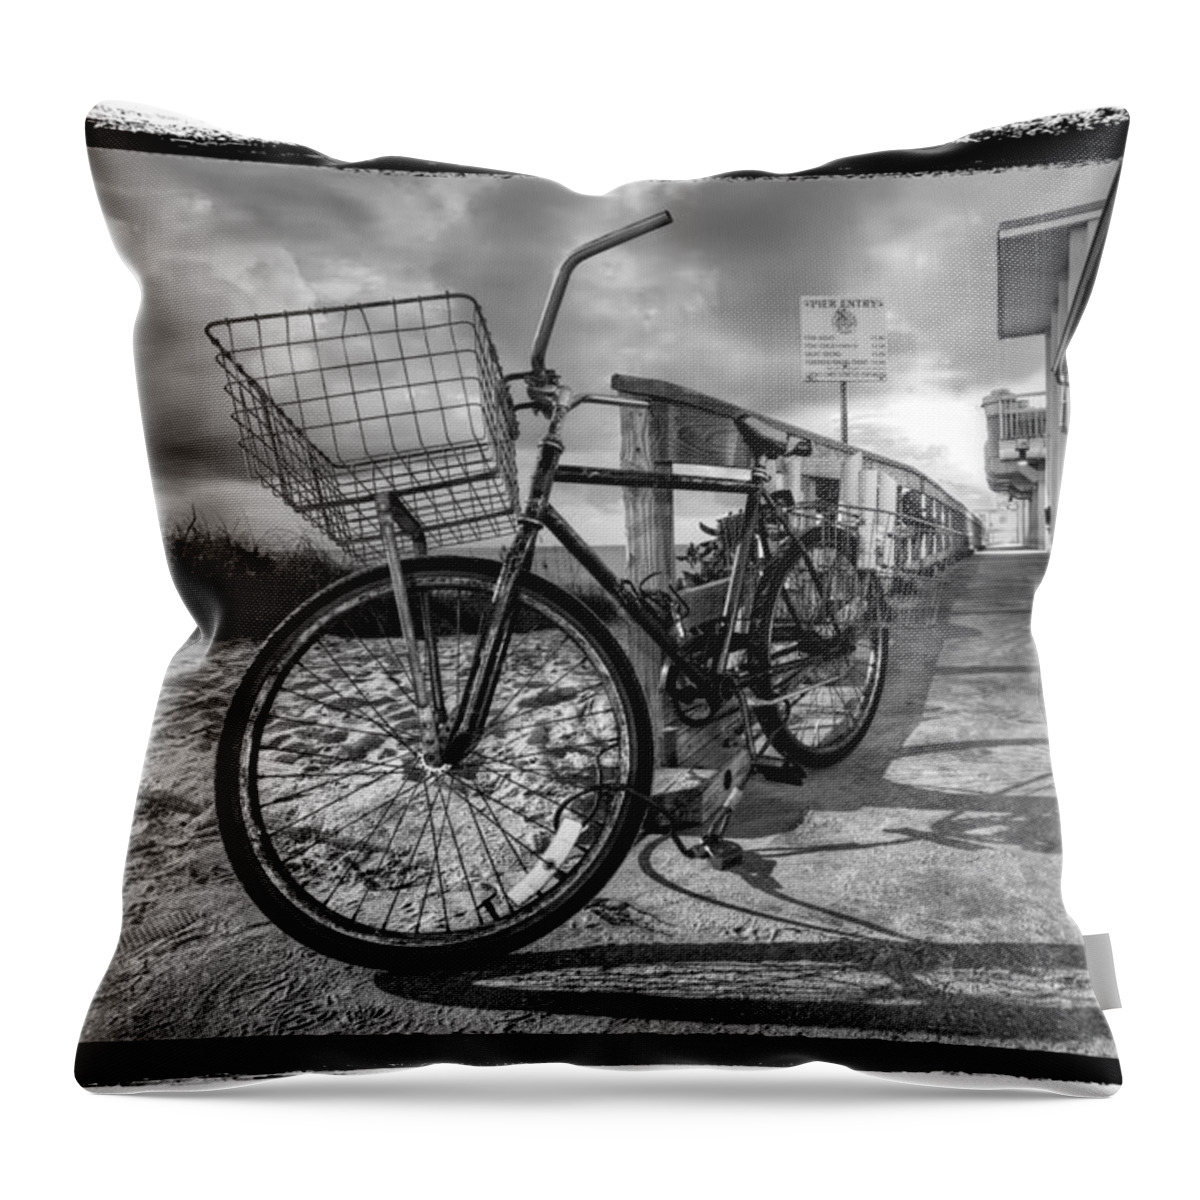 Clouds Throw Pillow featuring the photograph Black and White Beach Bike by Debra and Dave Vanderlaan